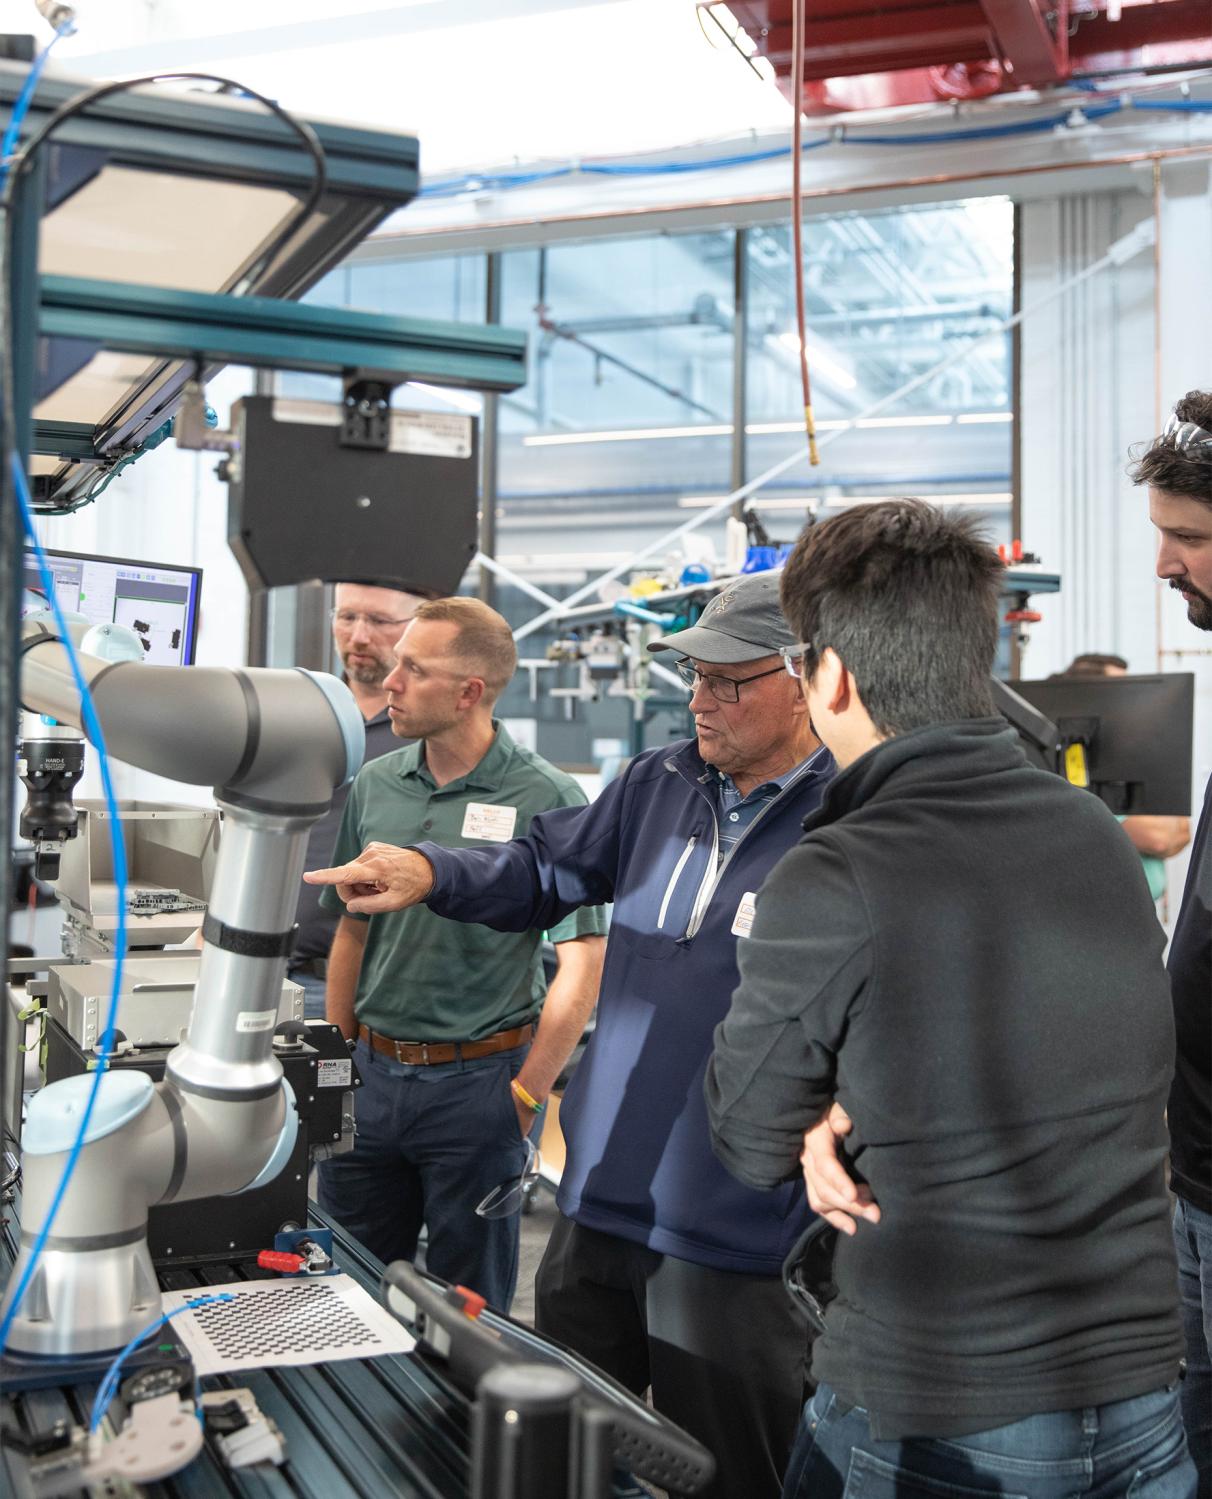 As part of Buffalo Manufacturing Works “Shift 2.0” program, representatives from a small and medium sized manufacturers (SMMs) tour the new automation lab to explore ways collaborative robots (“co-bots”) can be used to support their business growth.